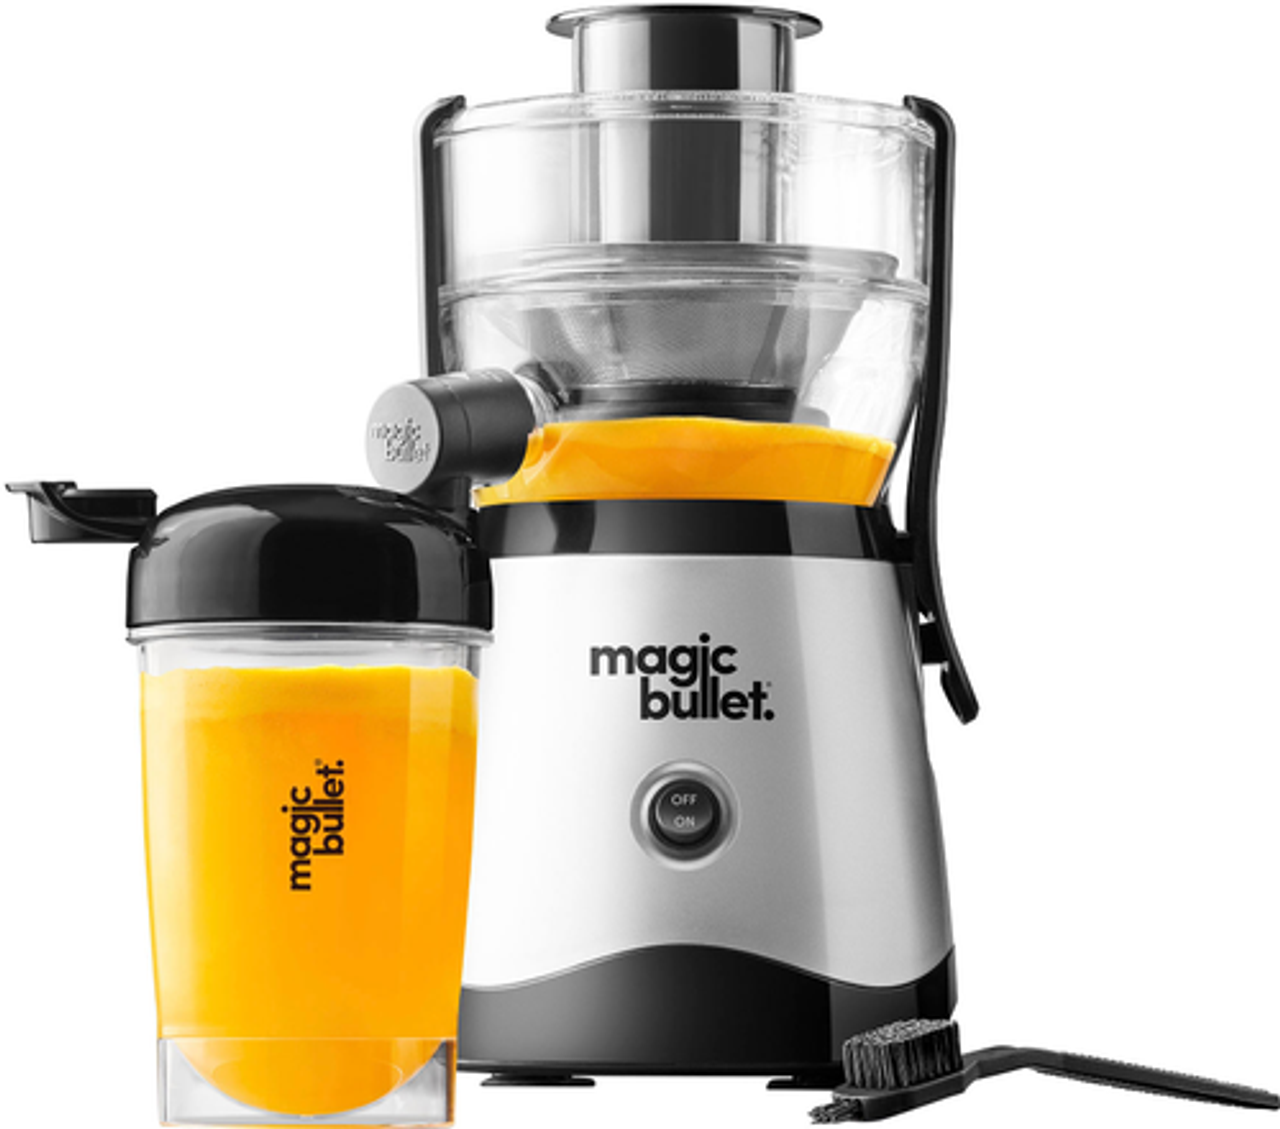 magic bullet Compact Juicer with cup - MBJ50100 - Silver